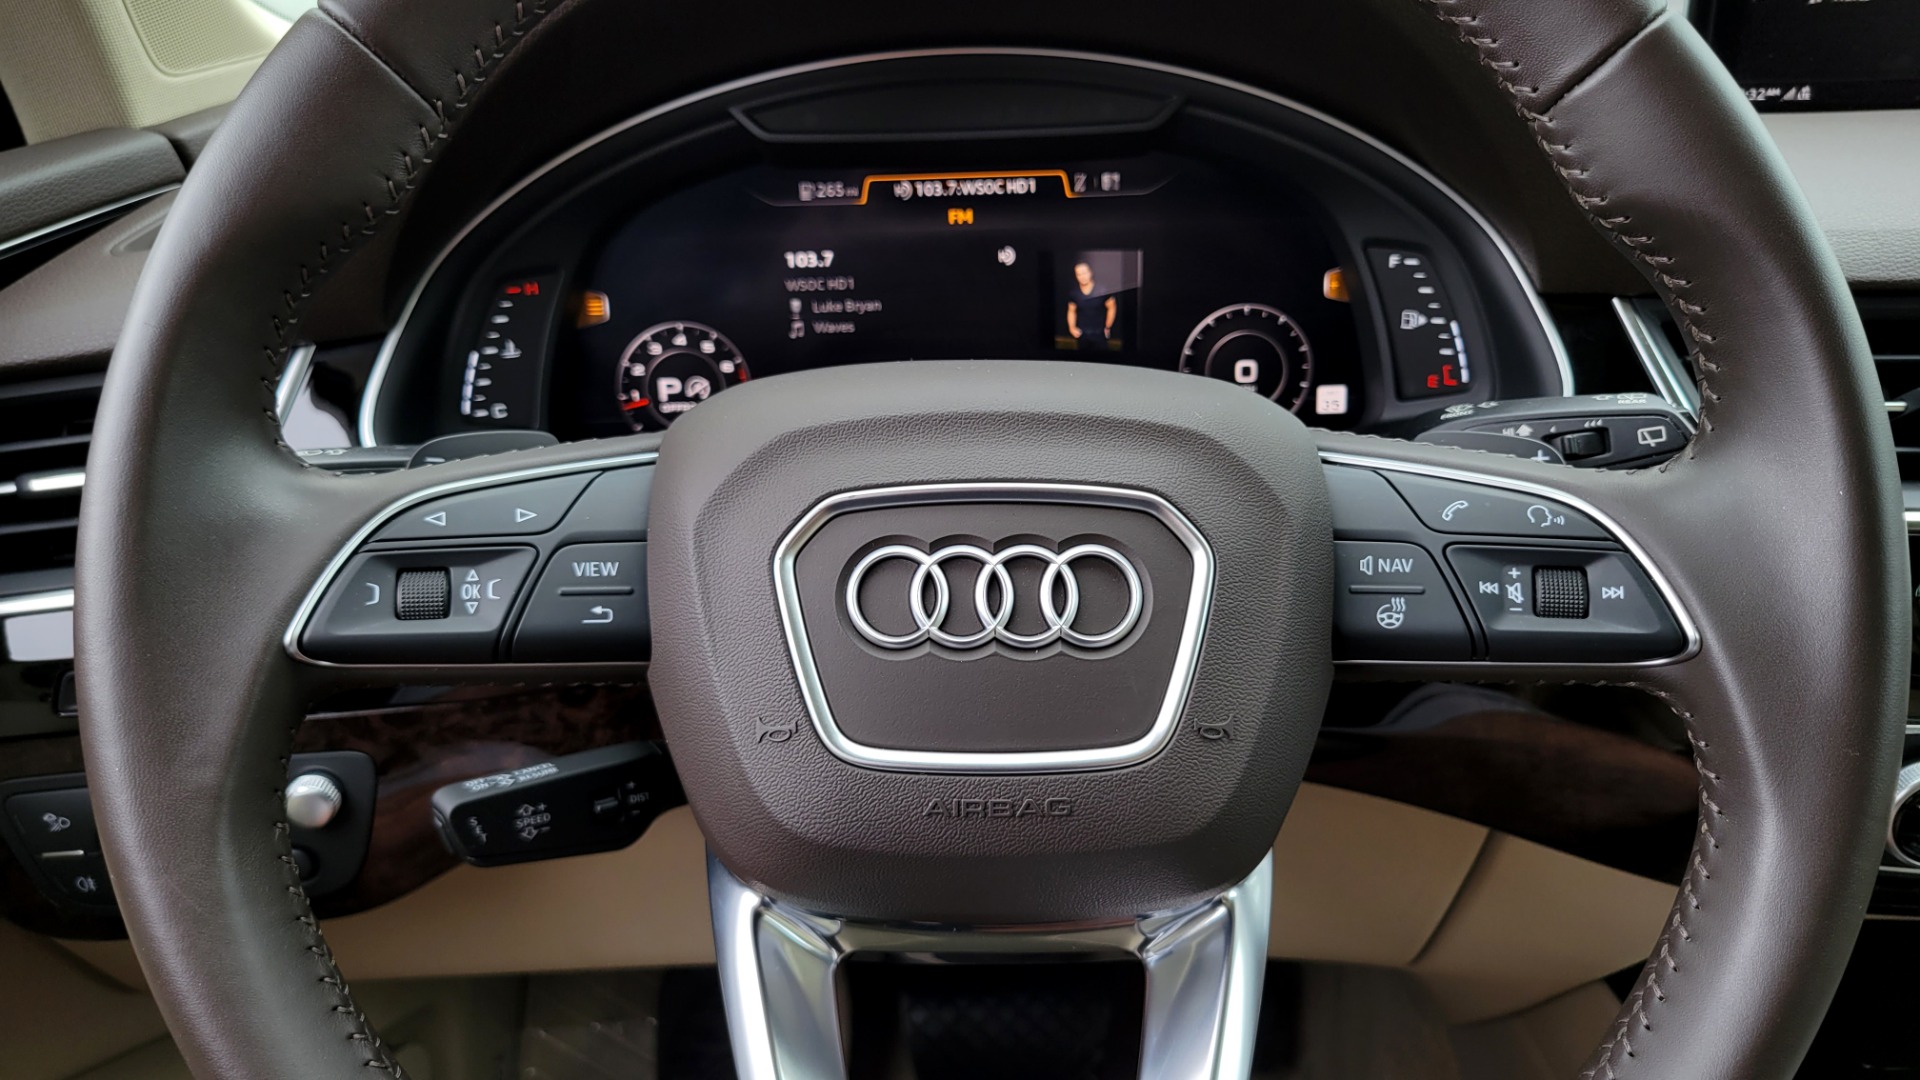 Used 2019 Audi Q7 PRESTIGE / CONV PKG / BOSE / HUD / CLD WTHR / TOWING / REARVIEW for sale $50,295 at Formula Imports in Charlotte NC 28227 50